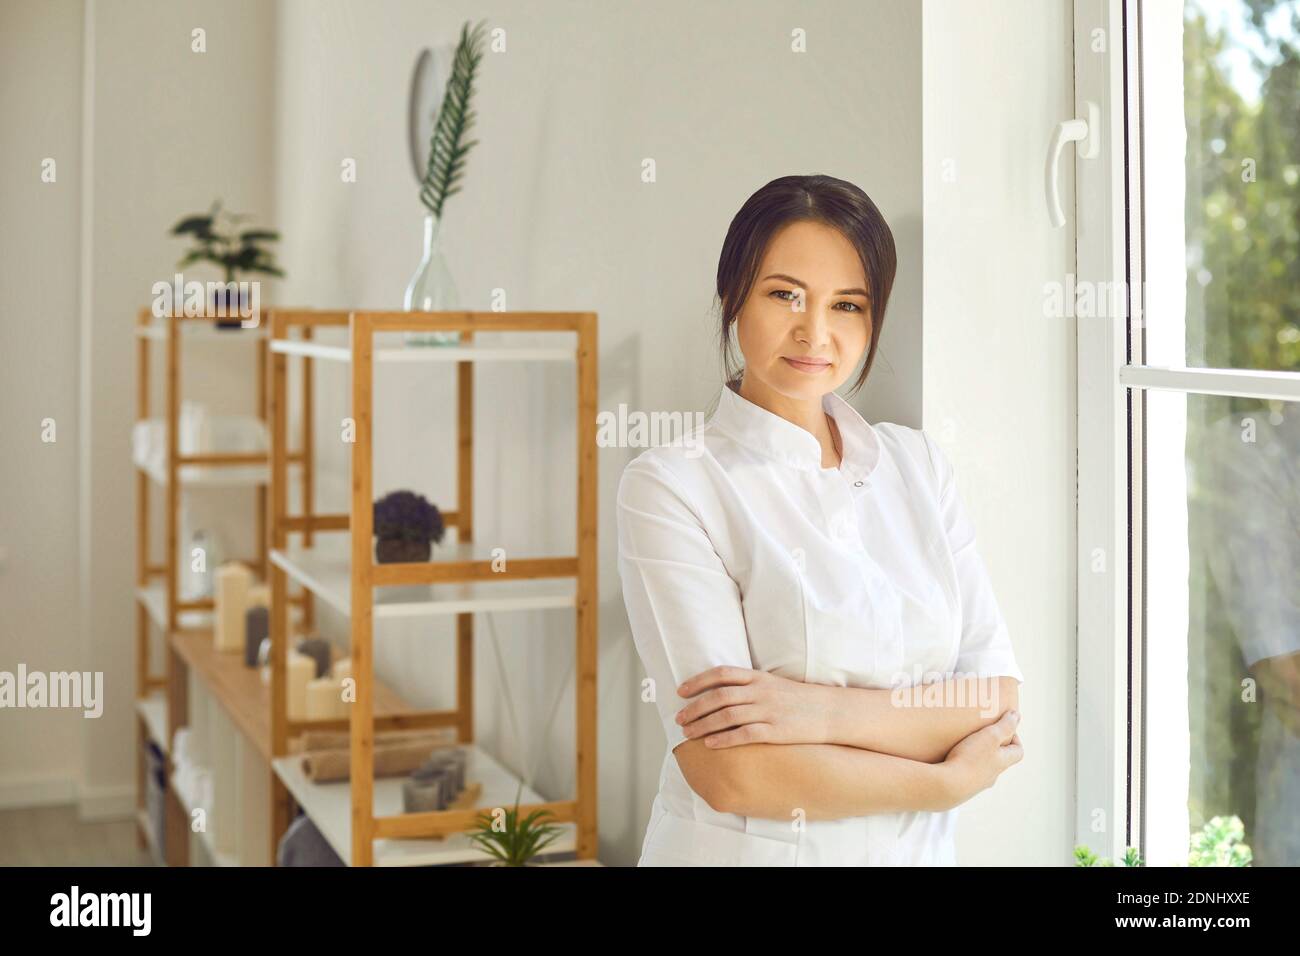 Serious professional beautician standing in her beauty salon and looking at camera Stock Photo